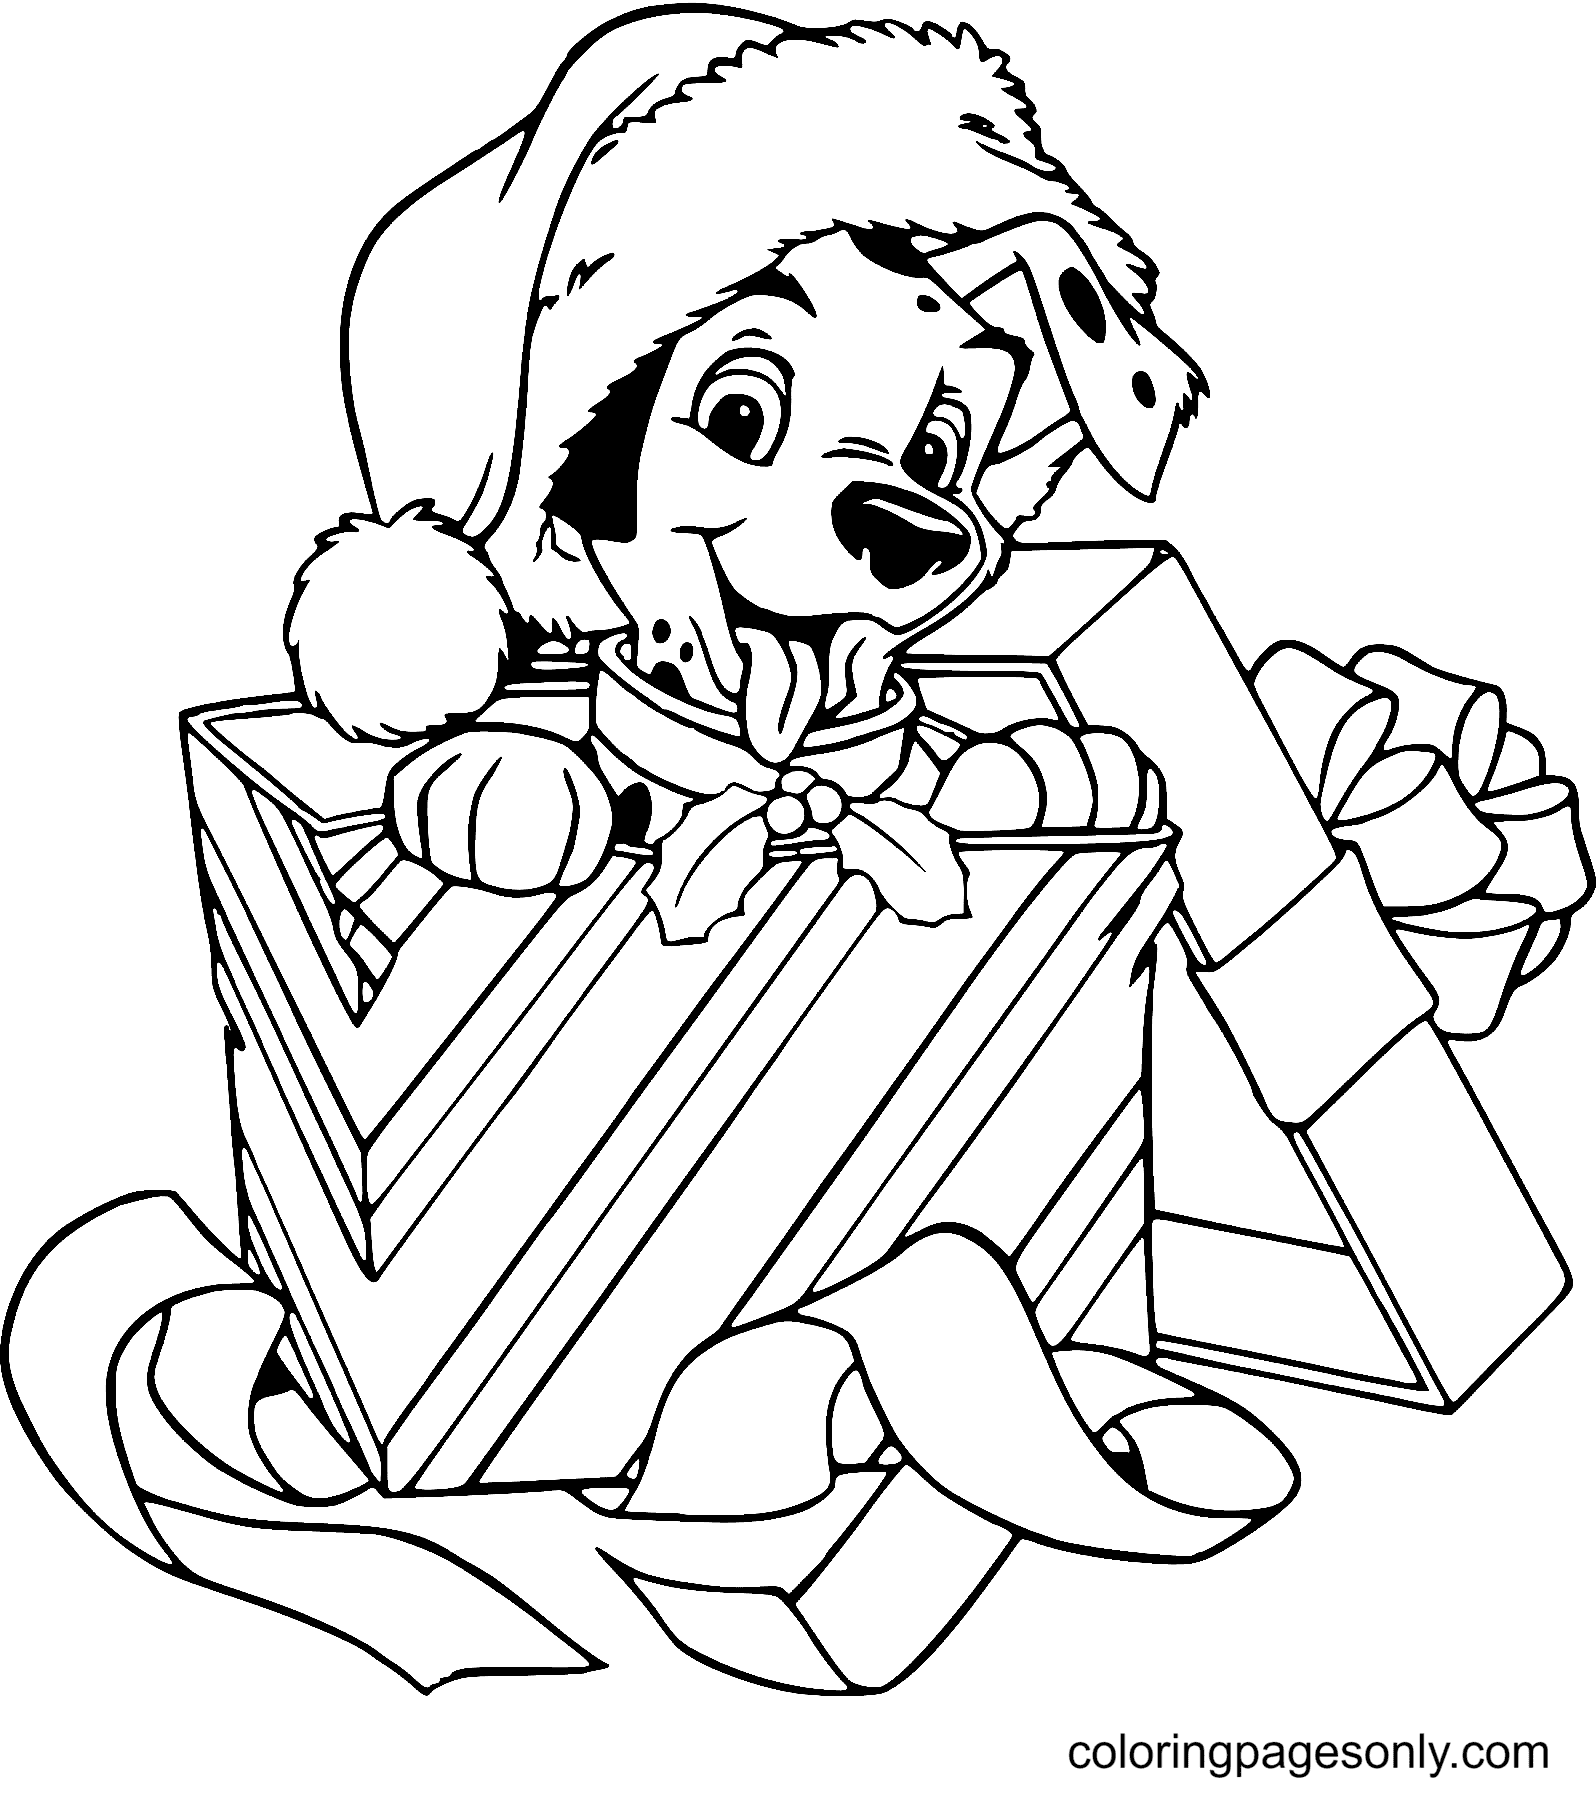 Puppy Wearing Santa Hat In Gift Box Coloring Pages